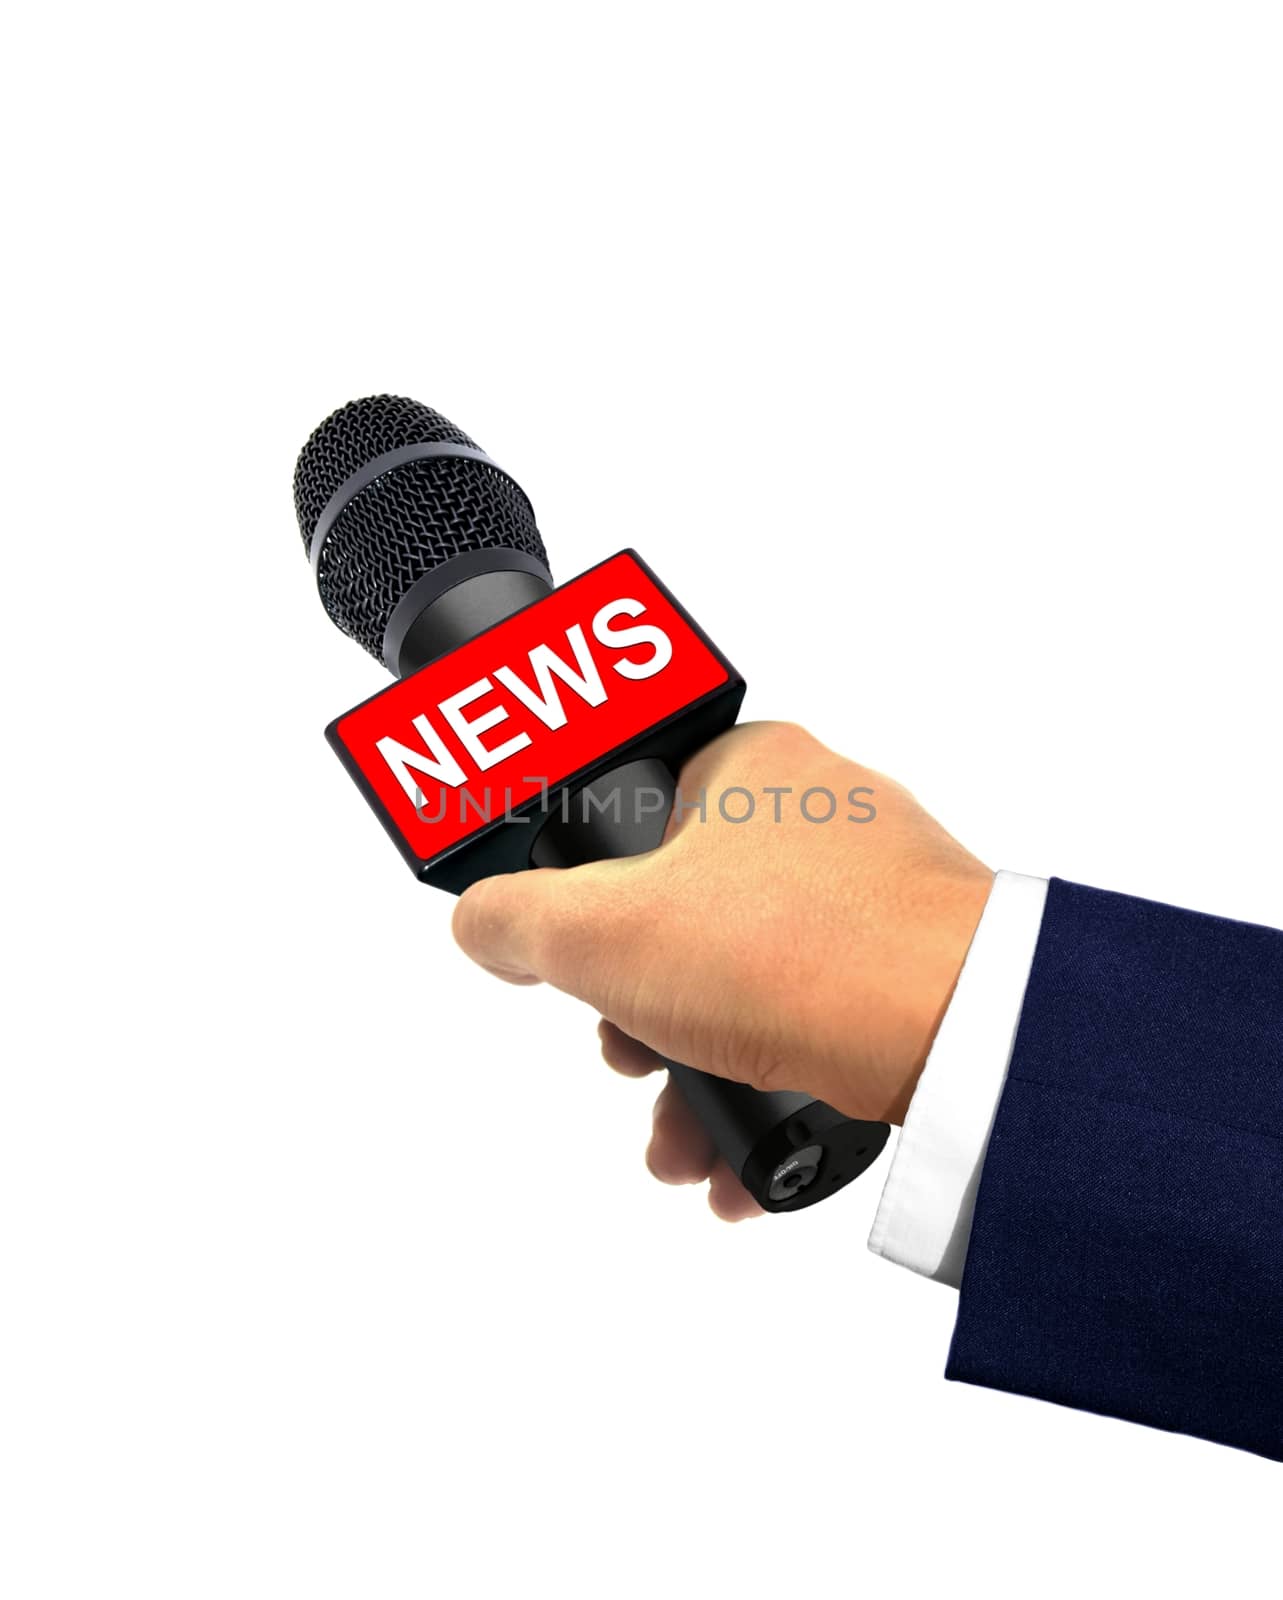 Reporter Hand Holding Microphone by razihusin